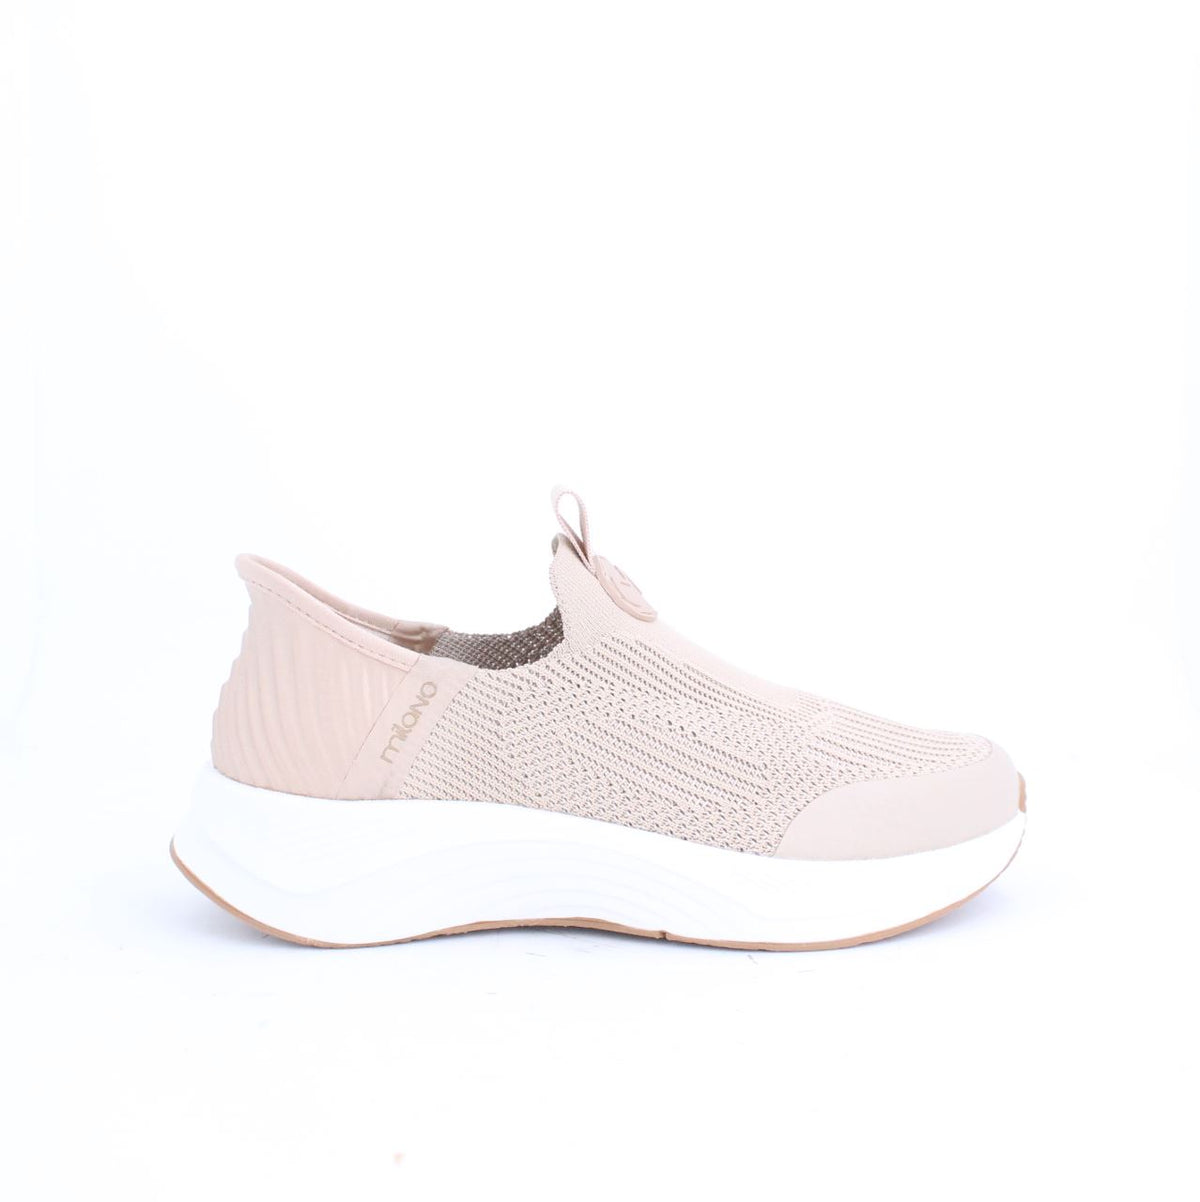 RIAN-TRAINERS-FLATS-BEIGE/NATURAL